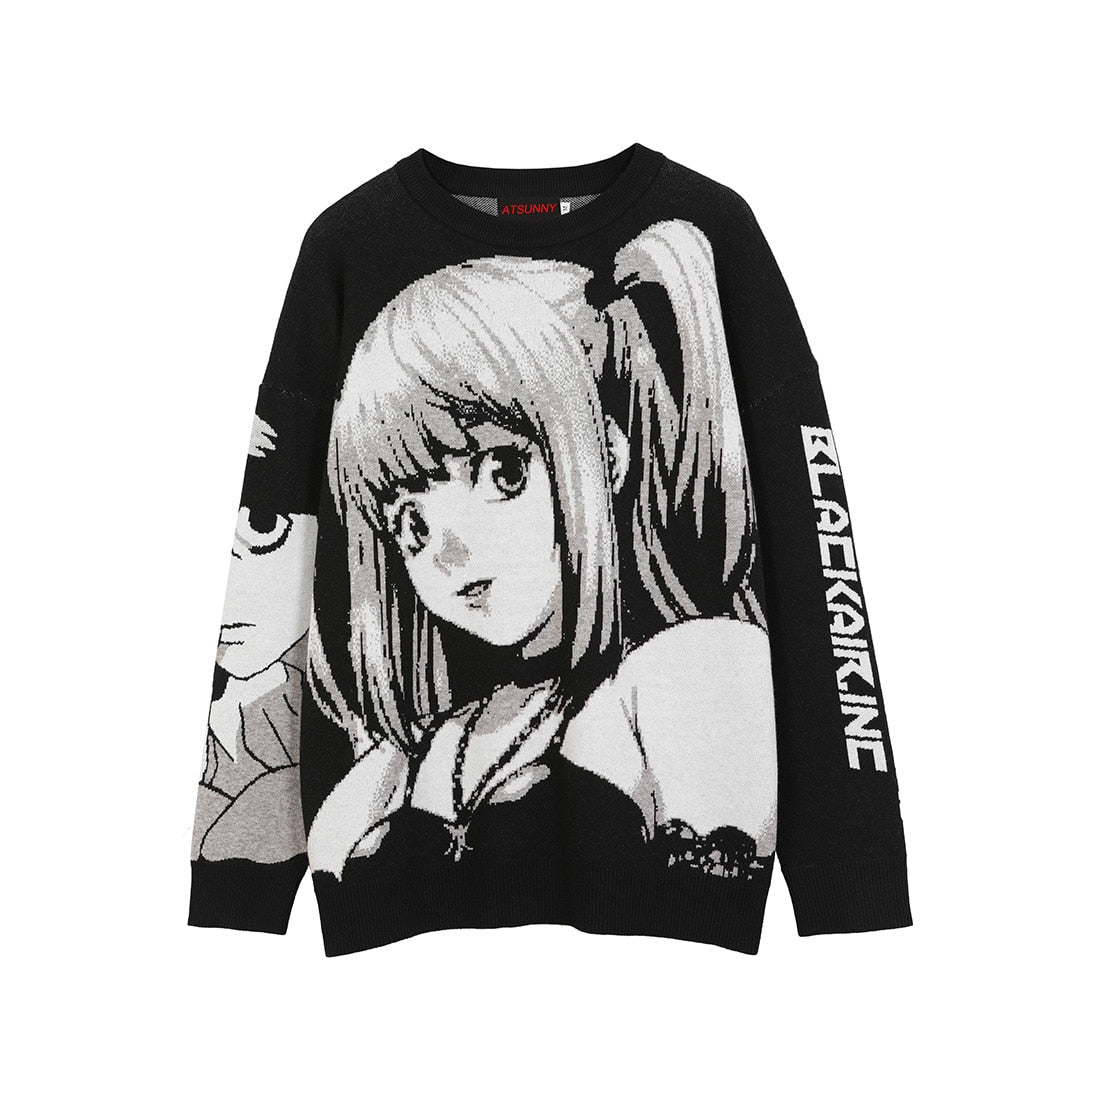 Anime - Streetwear - "BEAUTY & BRAINS" - L & Misa Knitted - Death Note Anime Sweater - Alpha Weebs